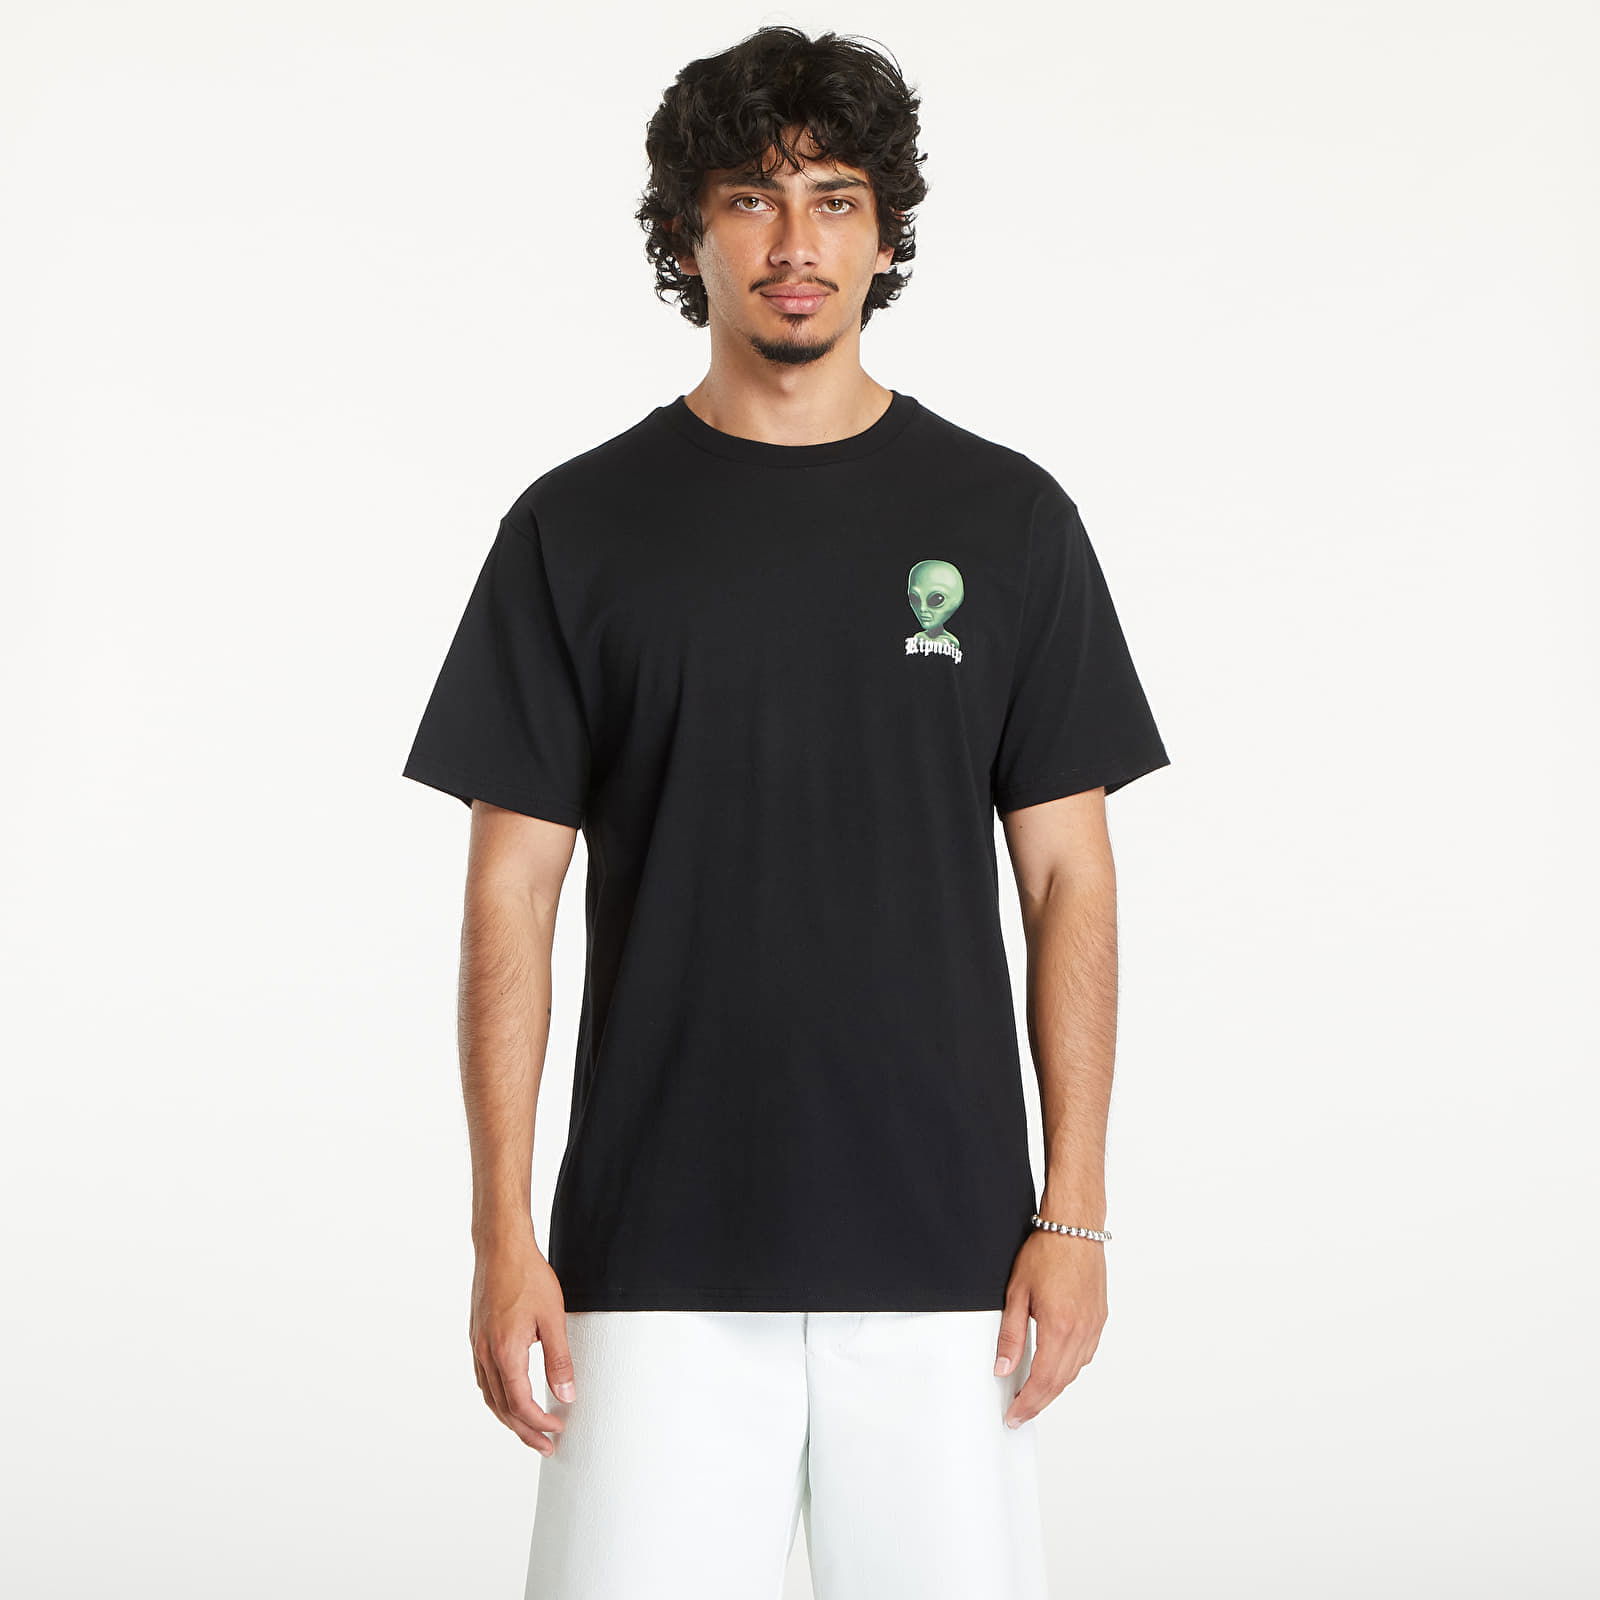 We Come In Peace Short Sleeve Tee Black